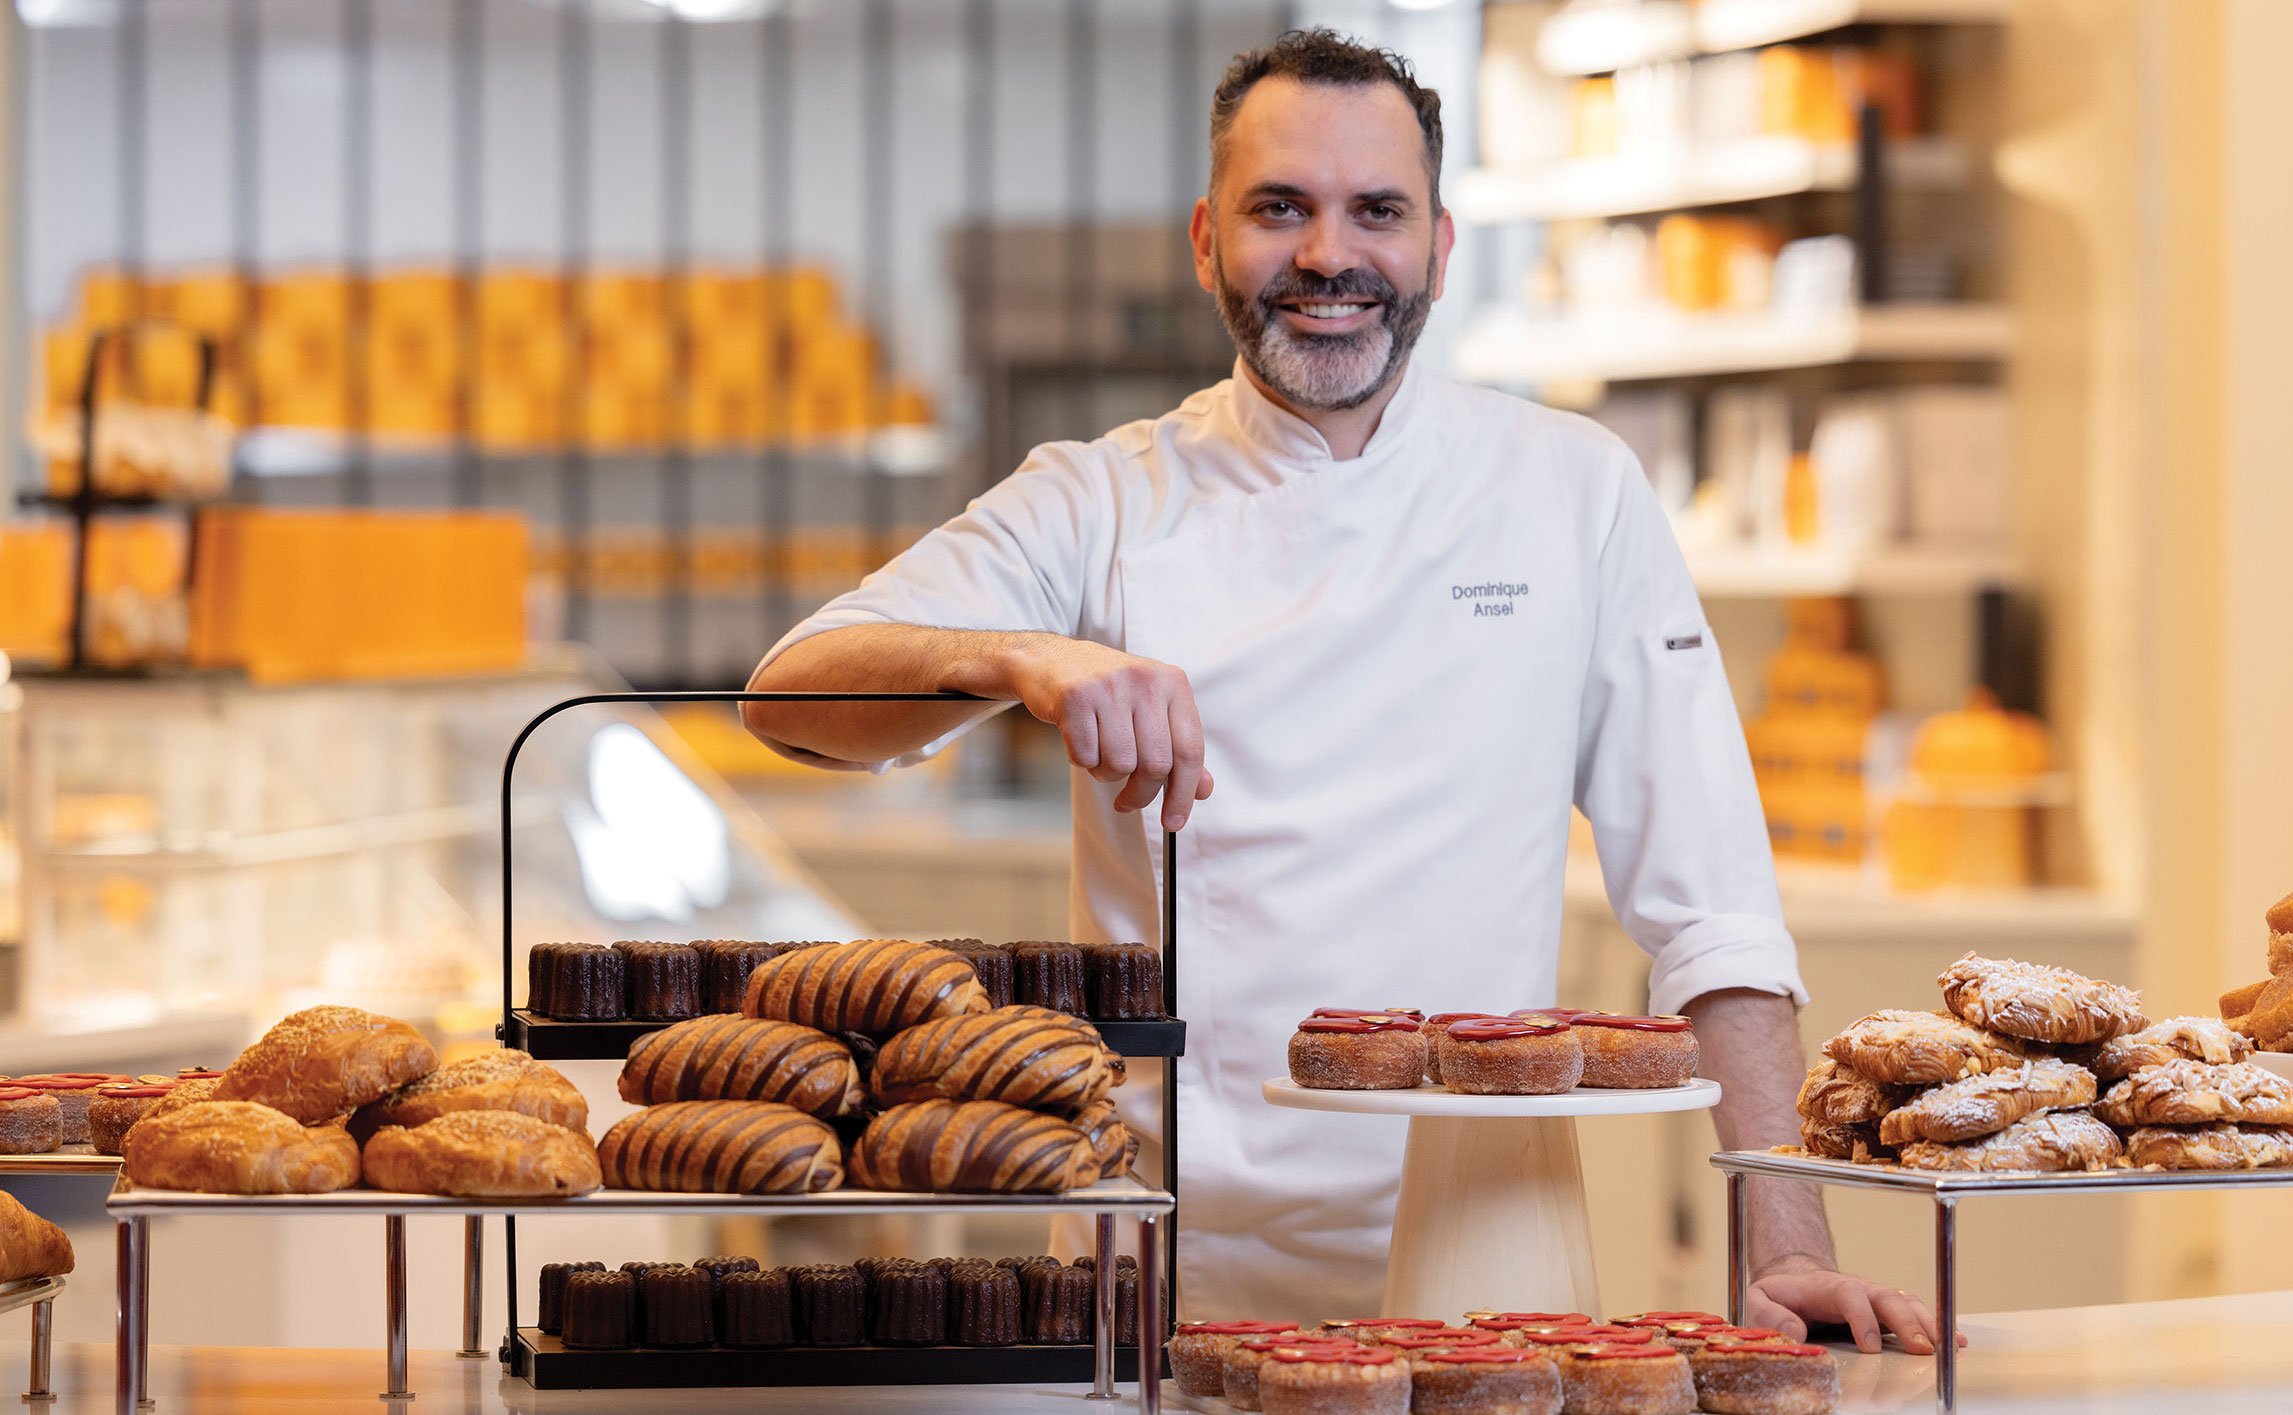 Pastry Chef Dominique Ansel